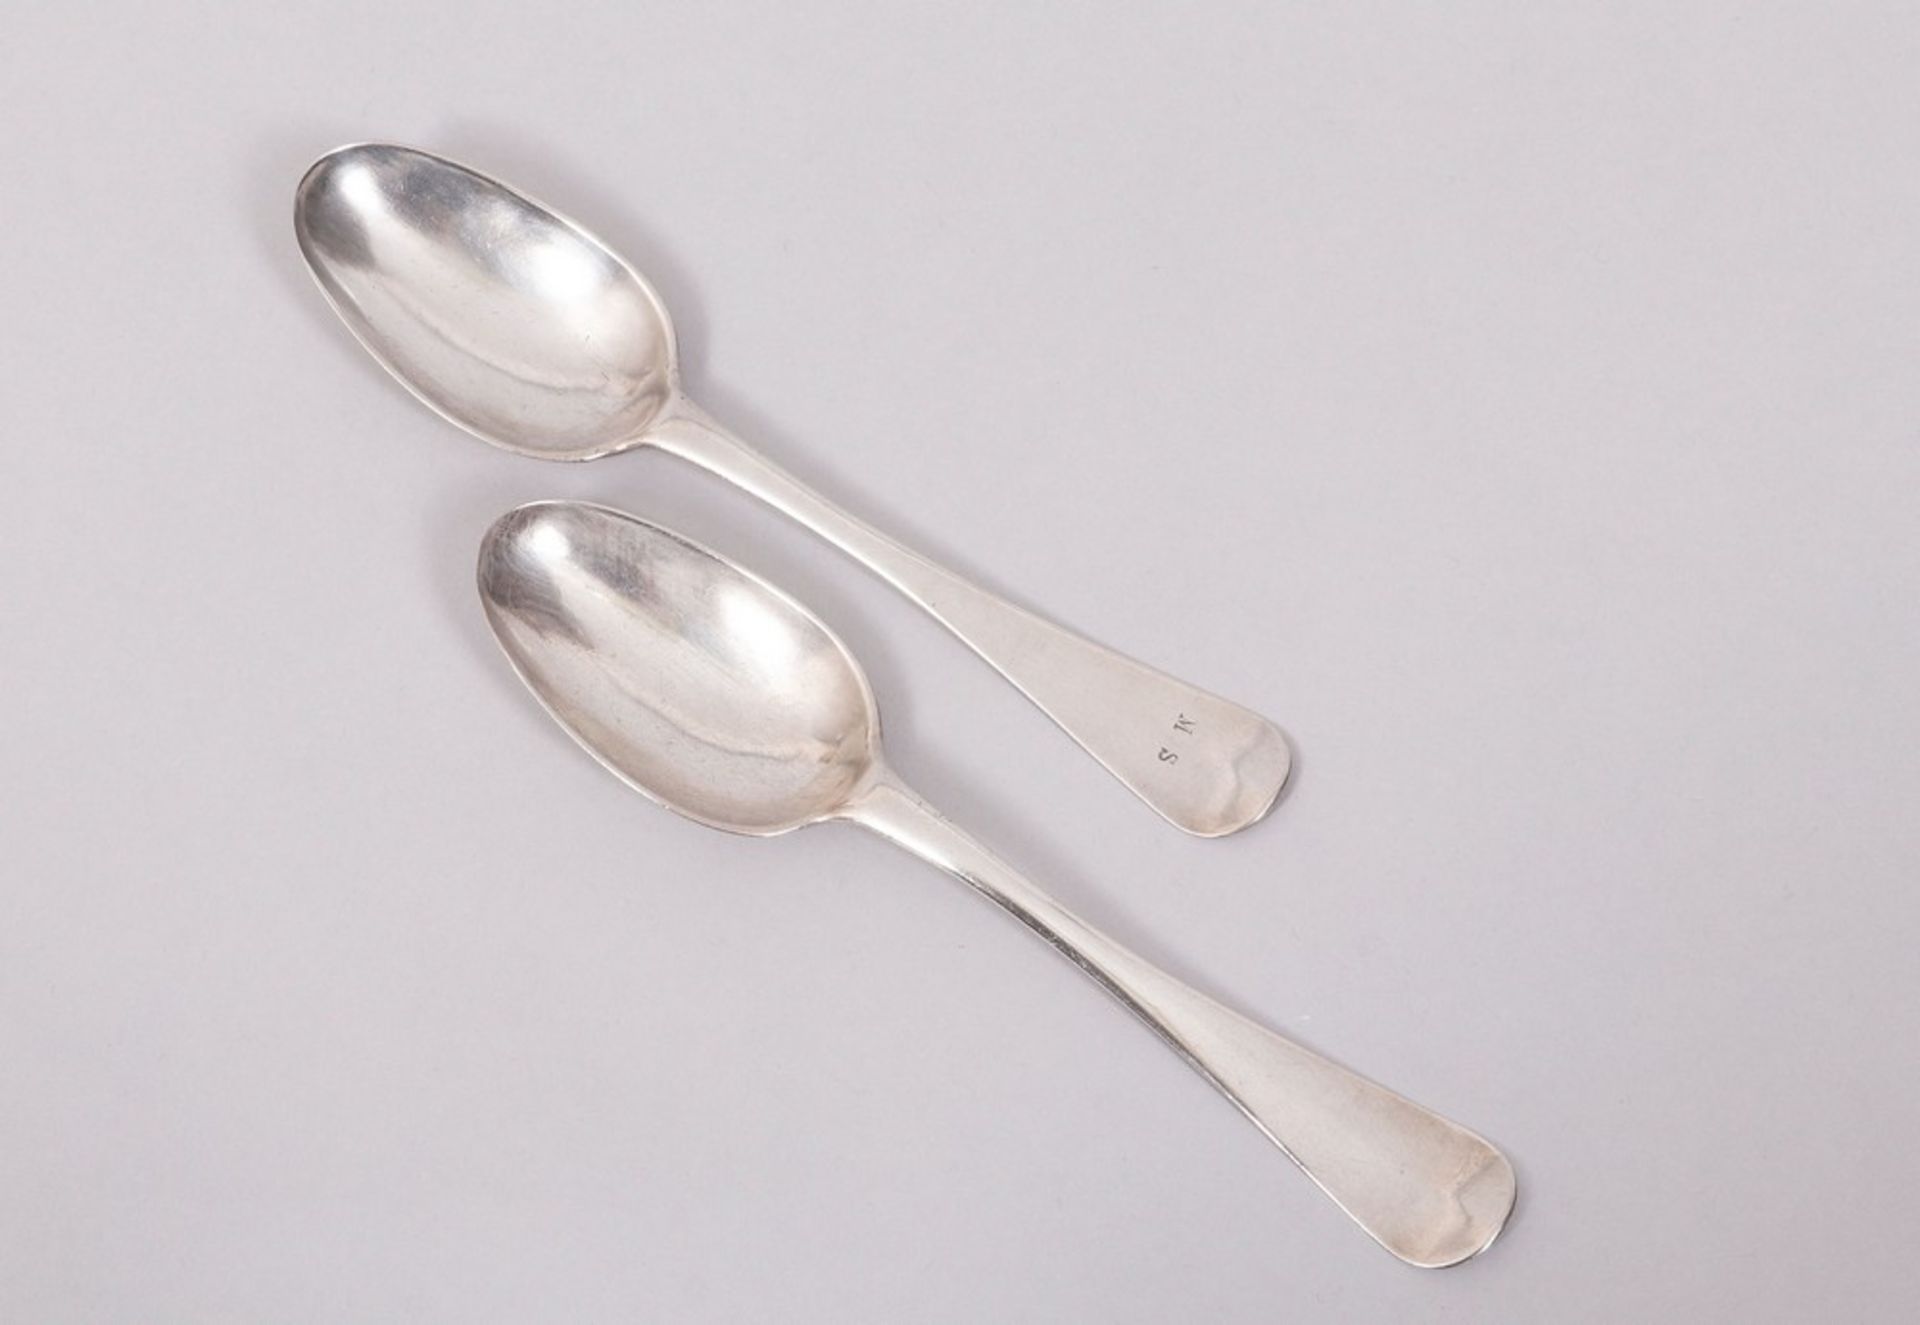 Pair of dining spoons, silver, Wismar, late 18th century/1800